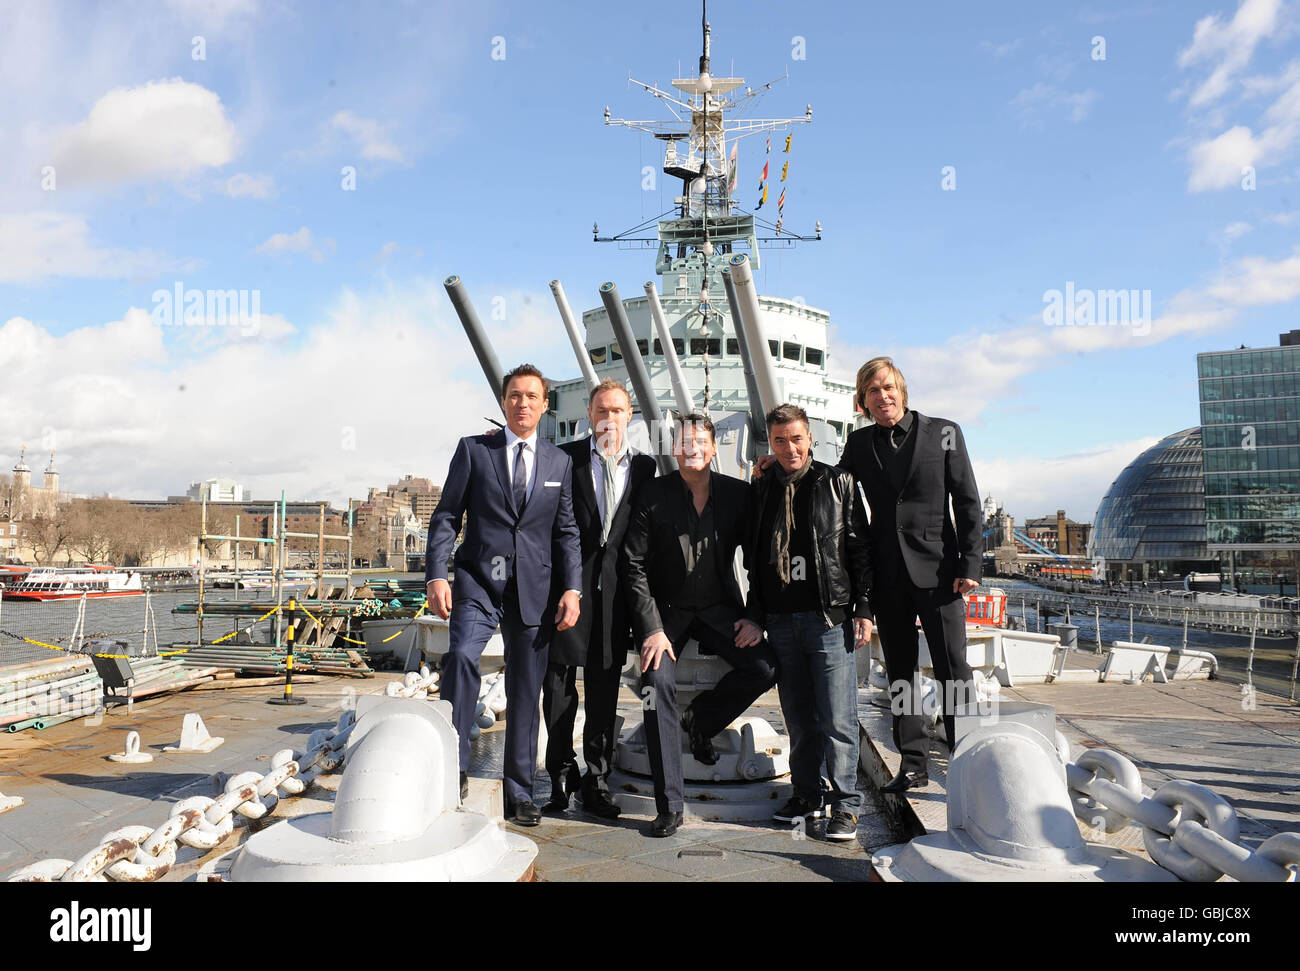 80's pop group Spandau Ballet announce their comeback at a photocall on HMS Belfast in London. Stock Photo